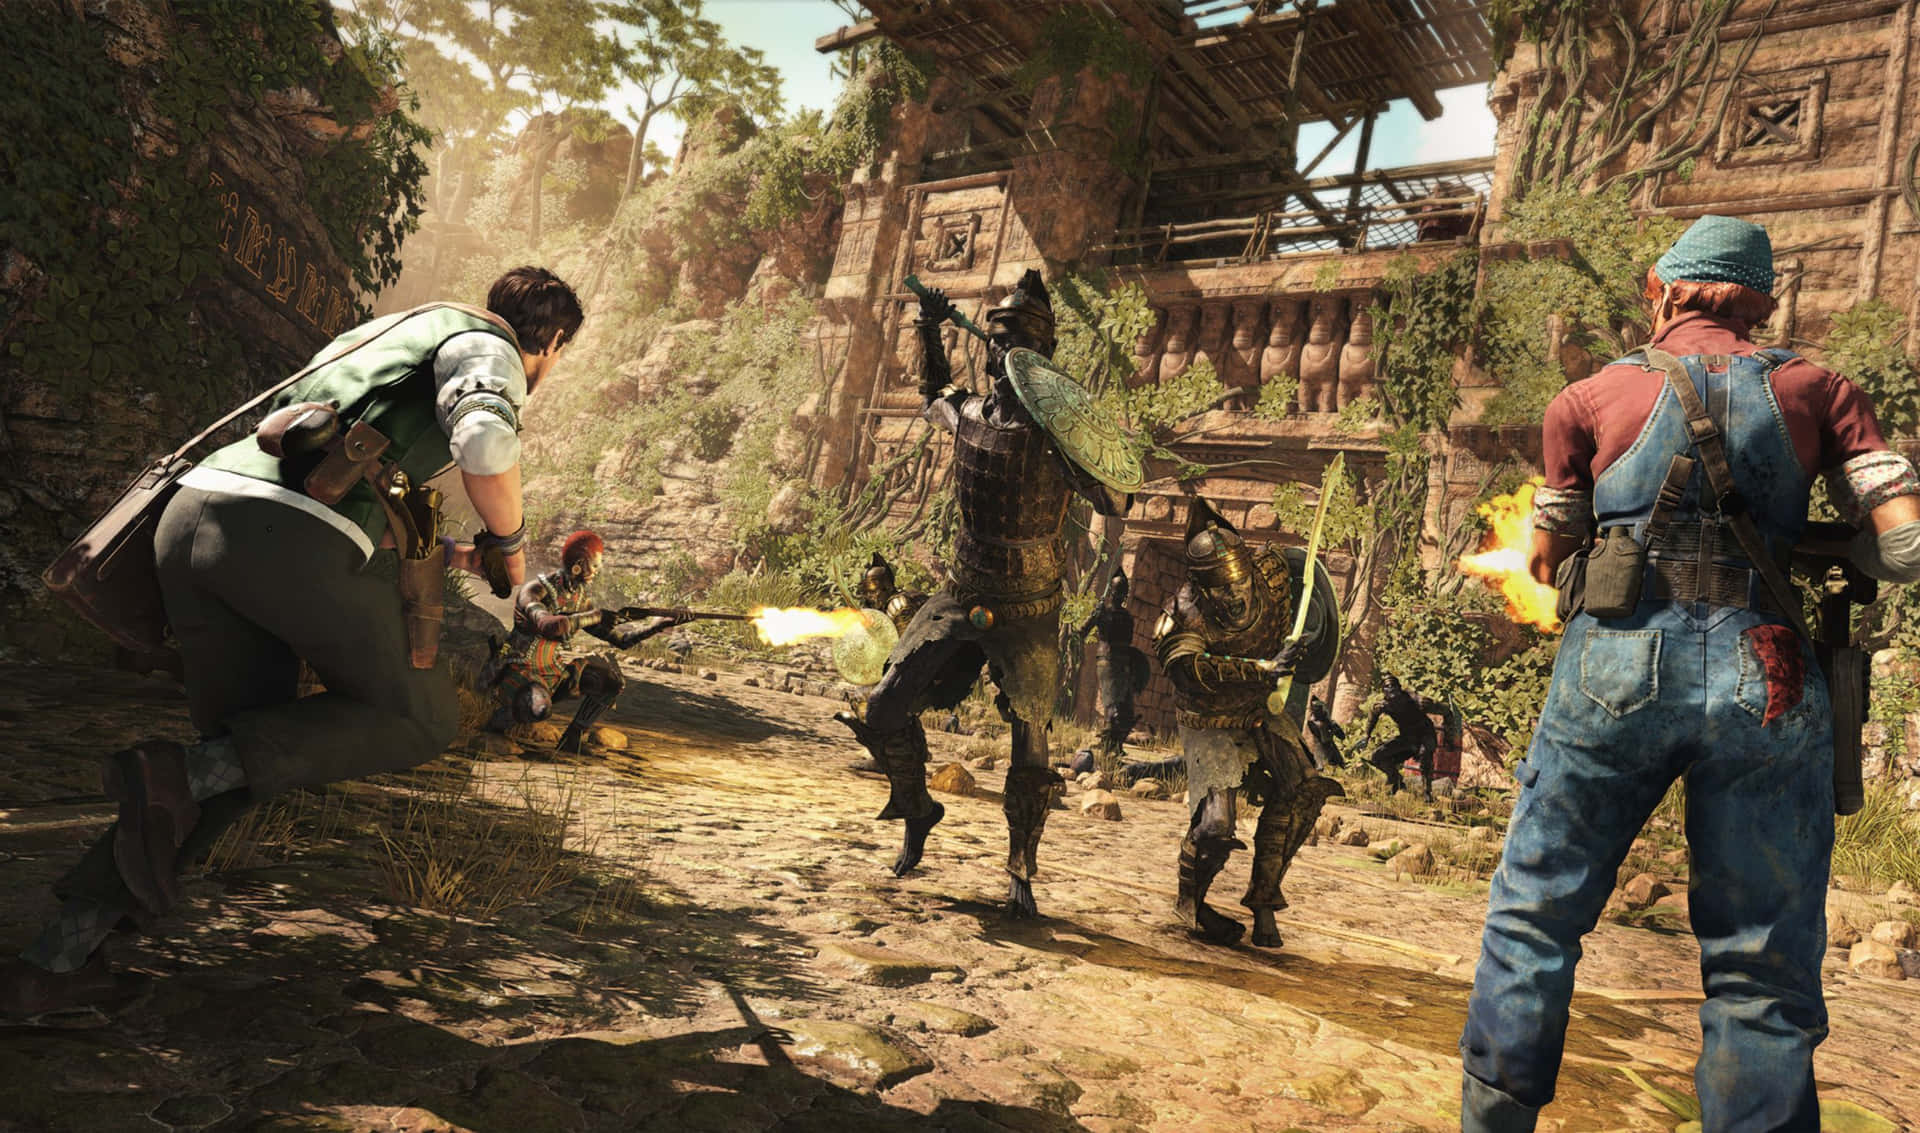 Join the Strange Brigade and team up against supernatural enemies.